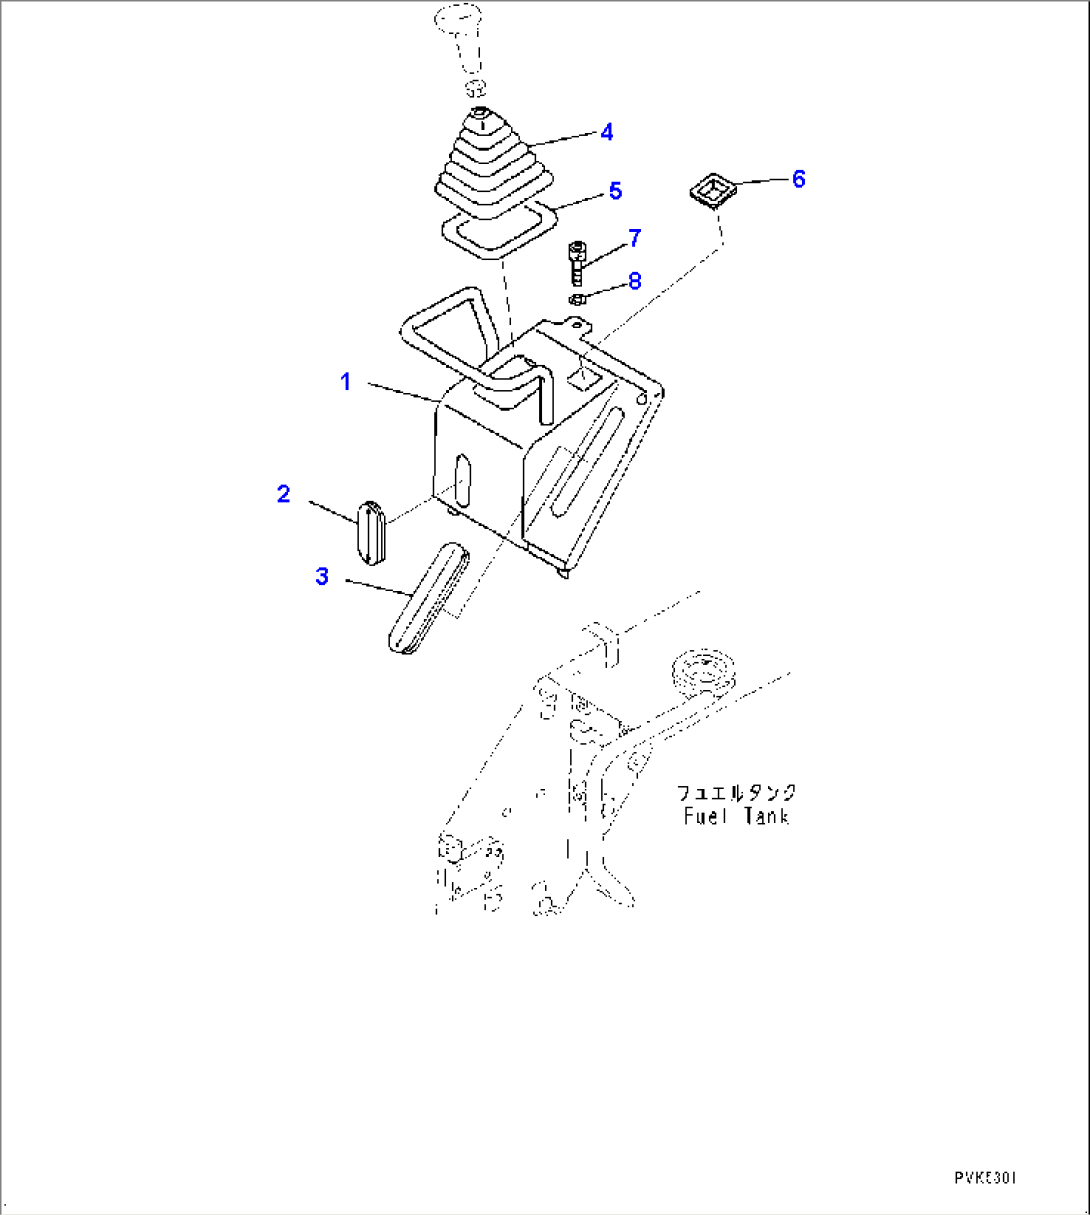 Fuel Tank and Controls, Lever Guide (#90210-)